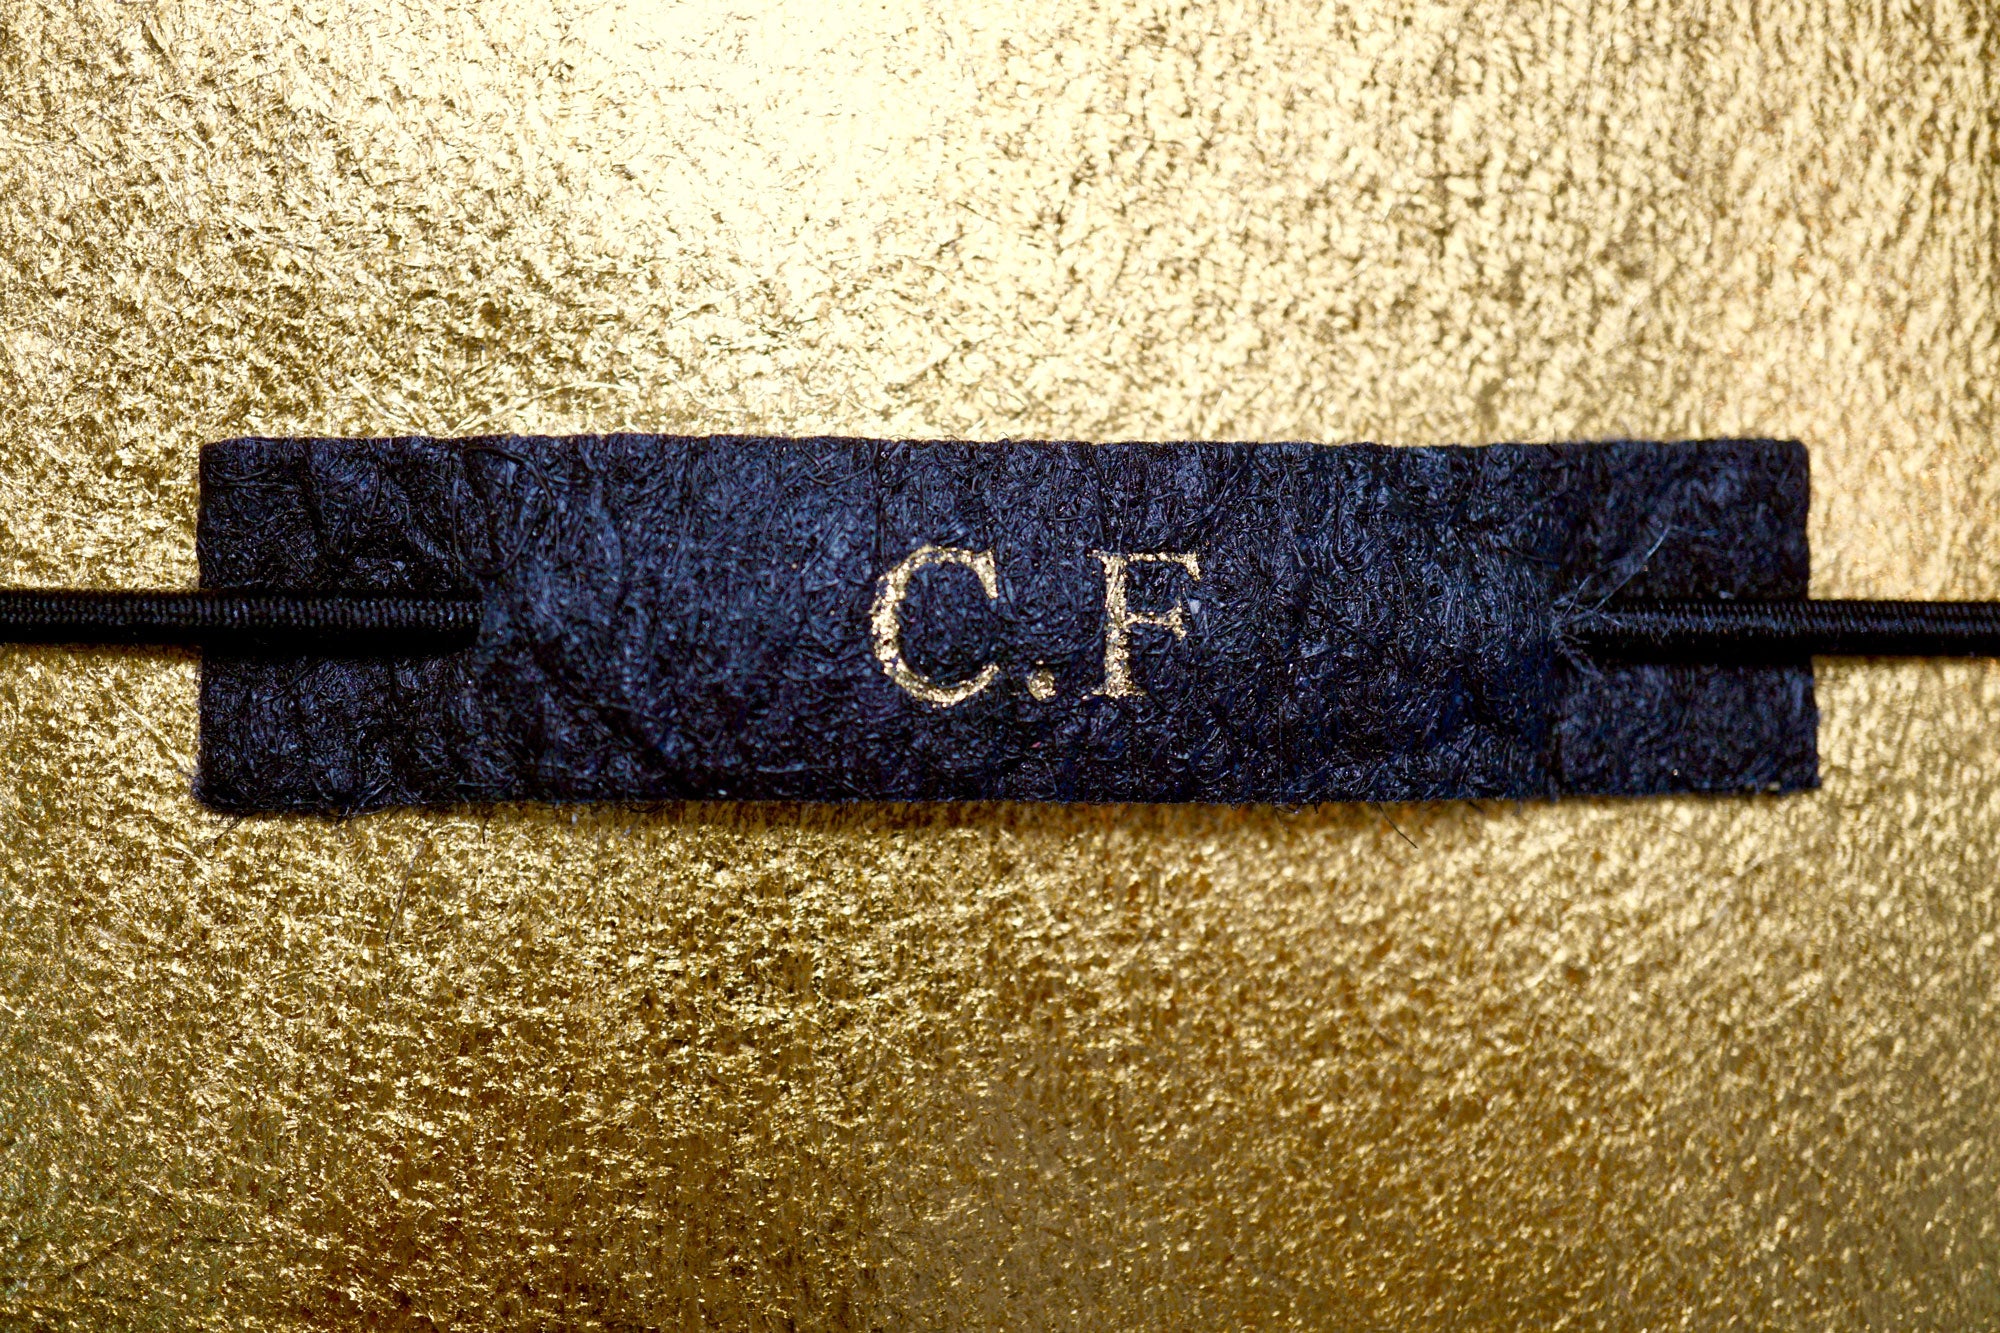 Personalise with your own monogram, embossed in gold foil